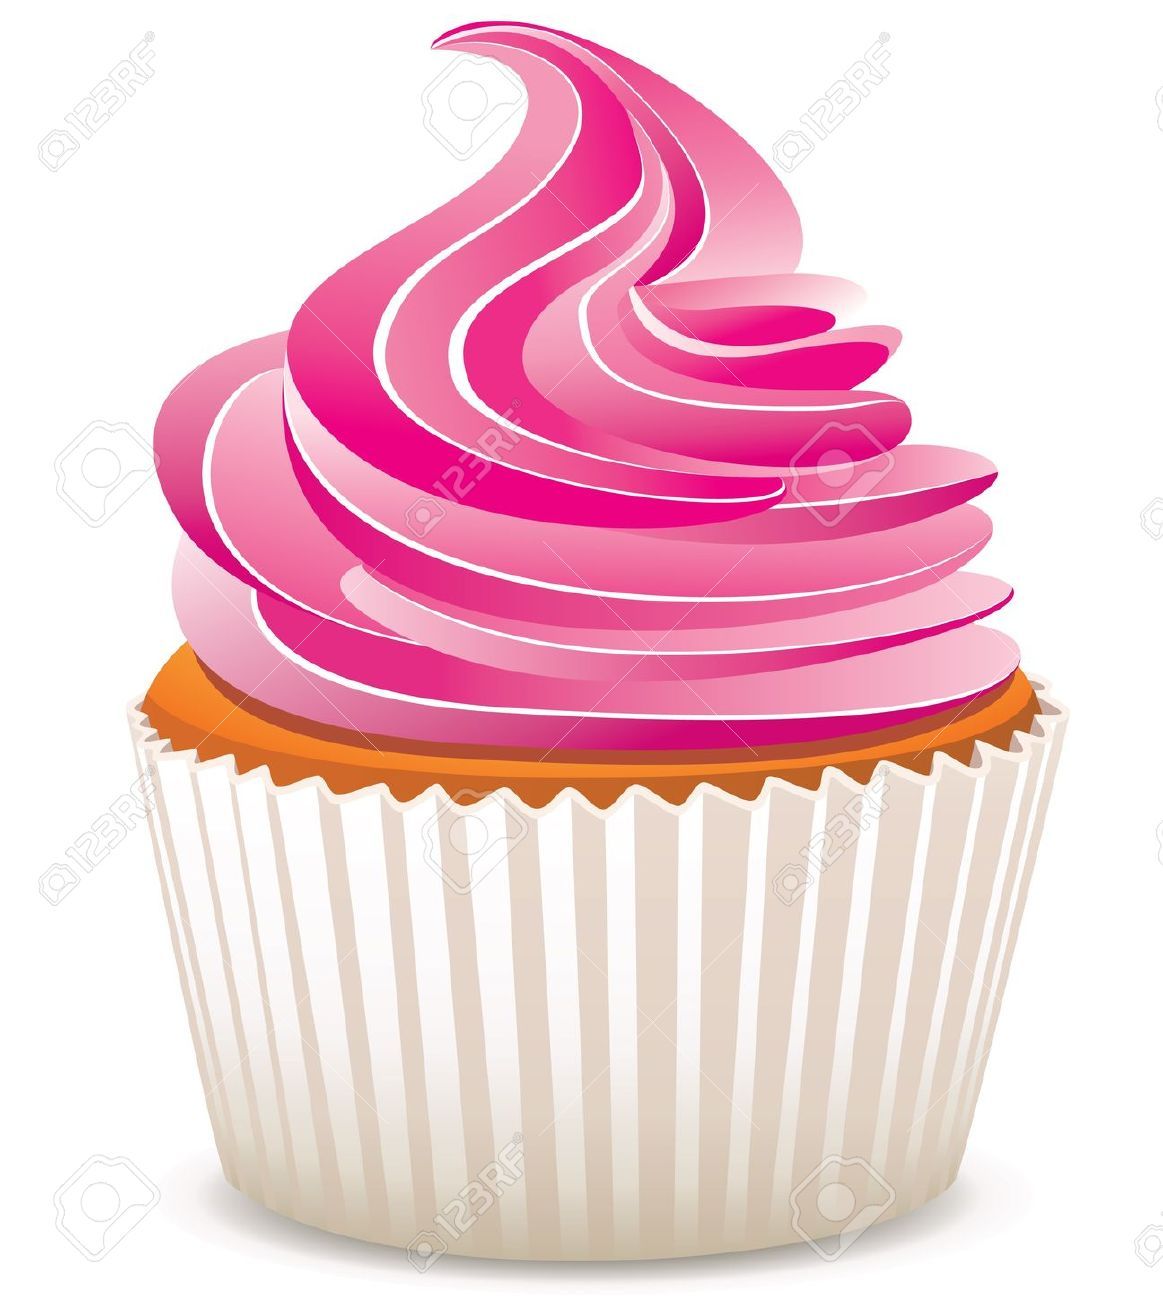 Download pink images to. Clipart cupcake logo